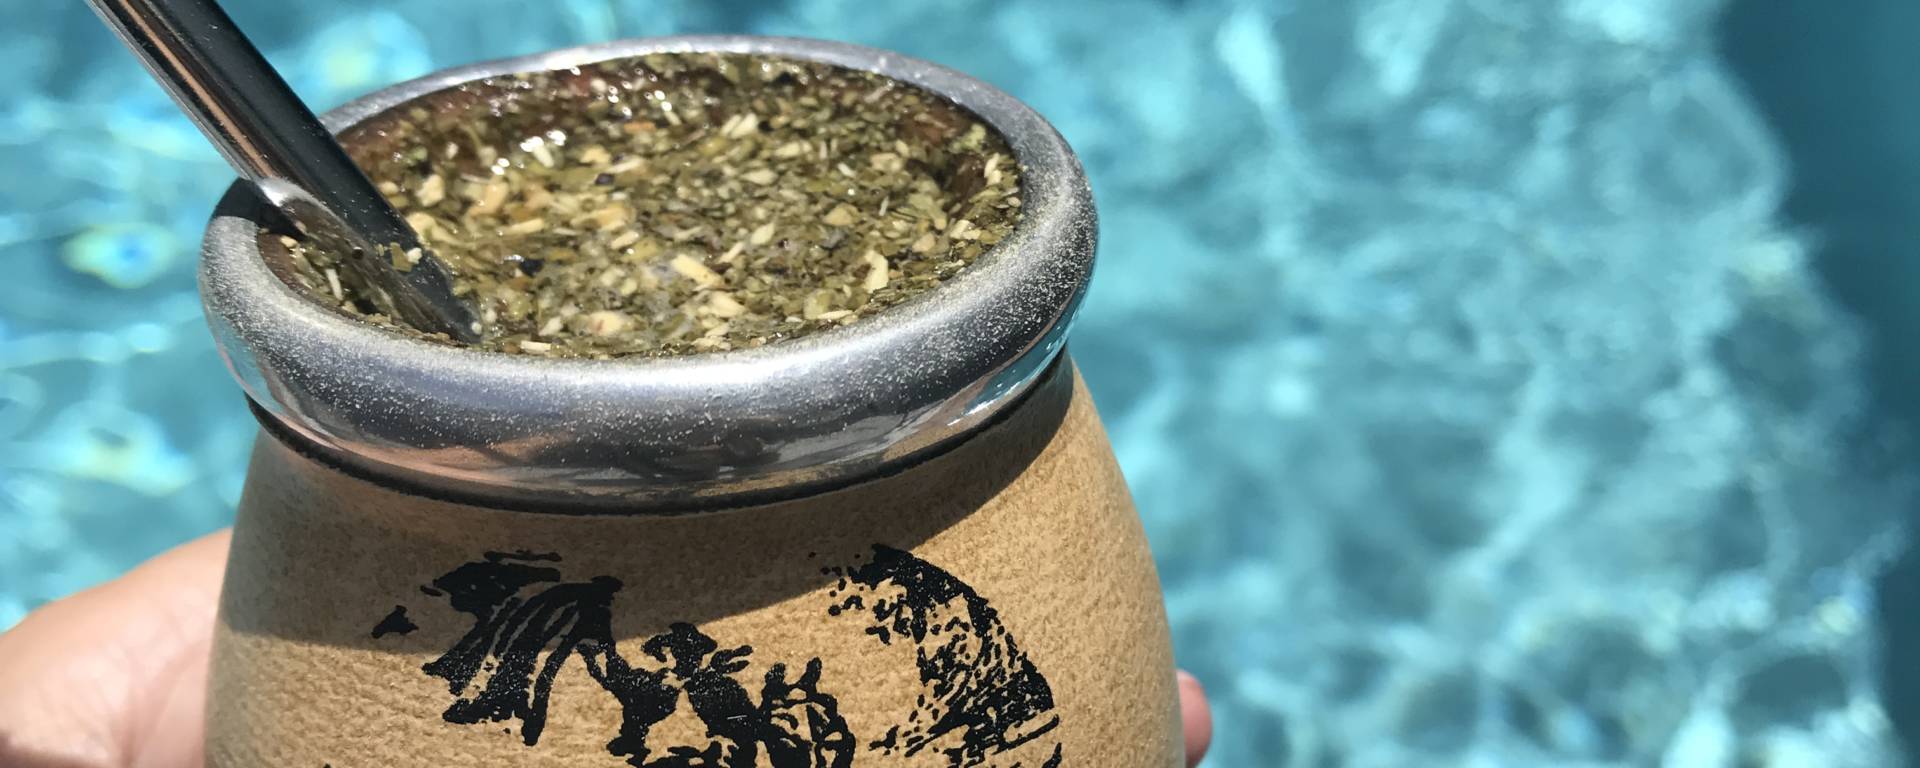 There’s nothing like sitting by the pool enjoying a mate